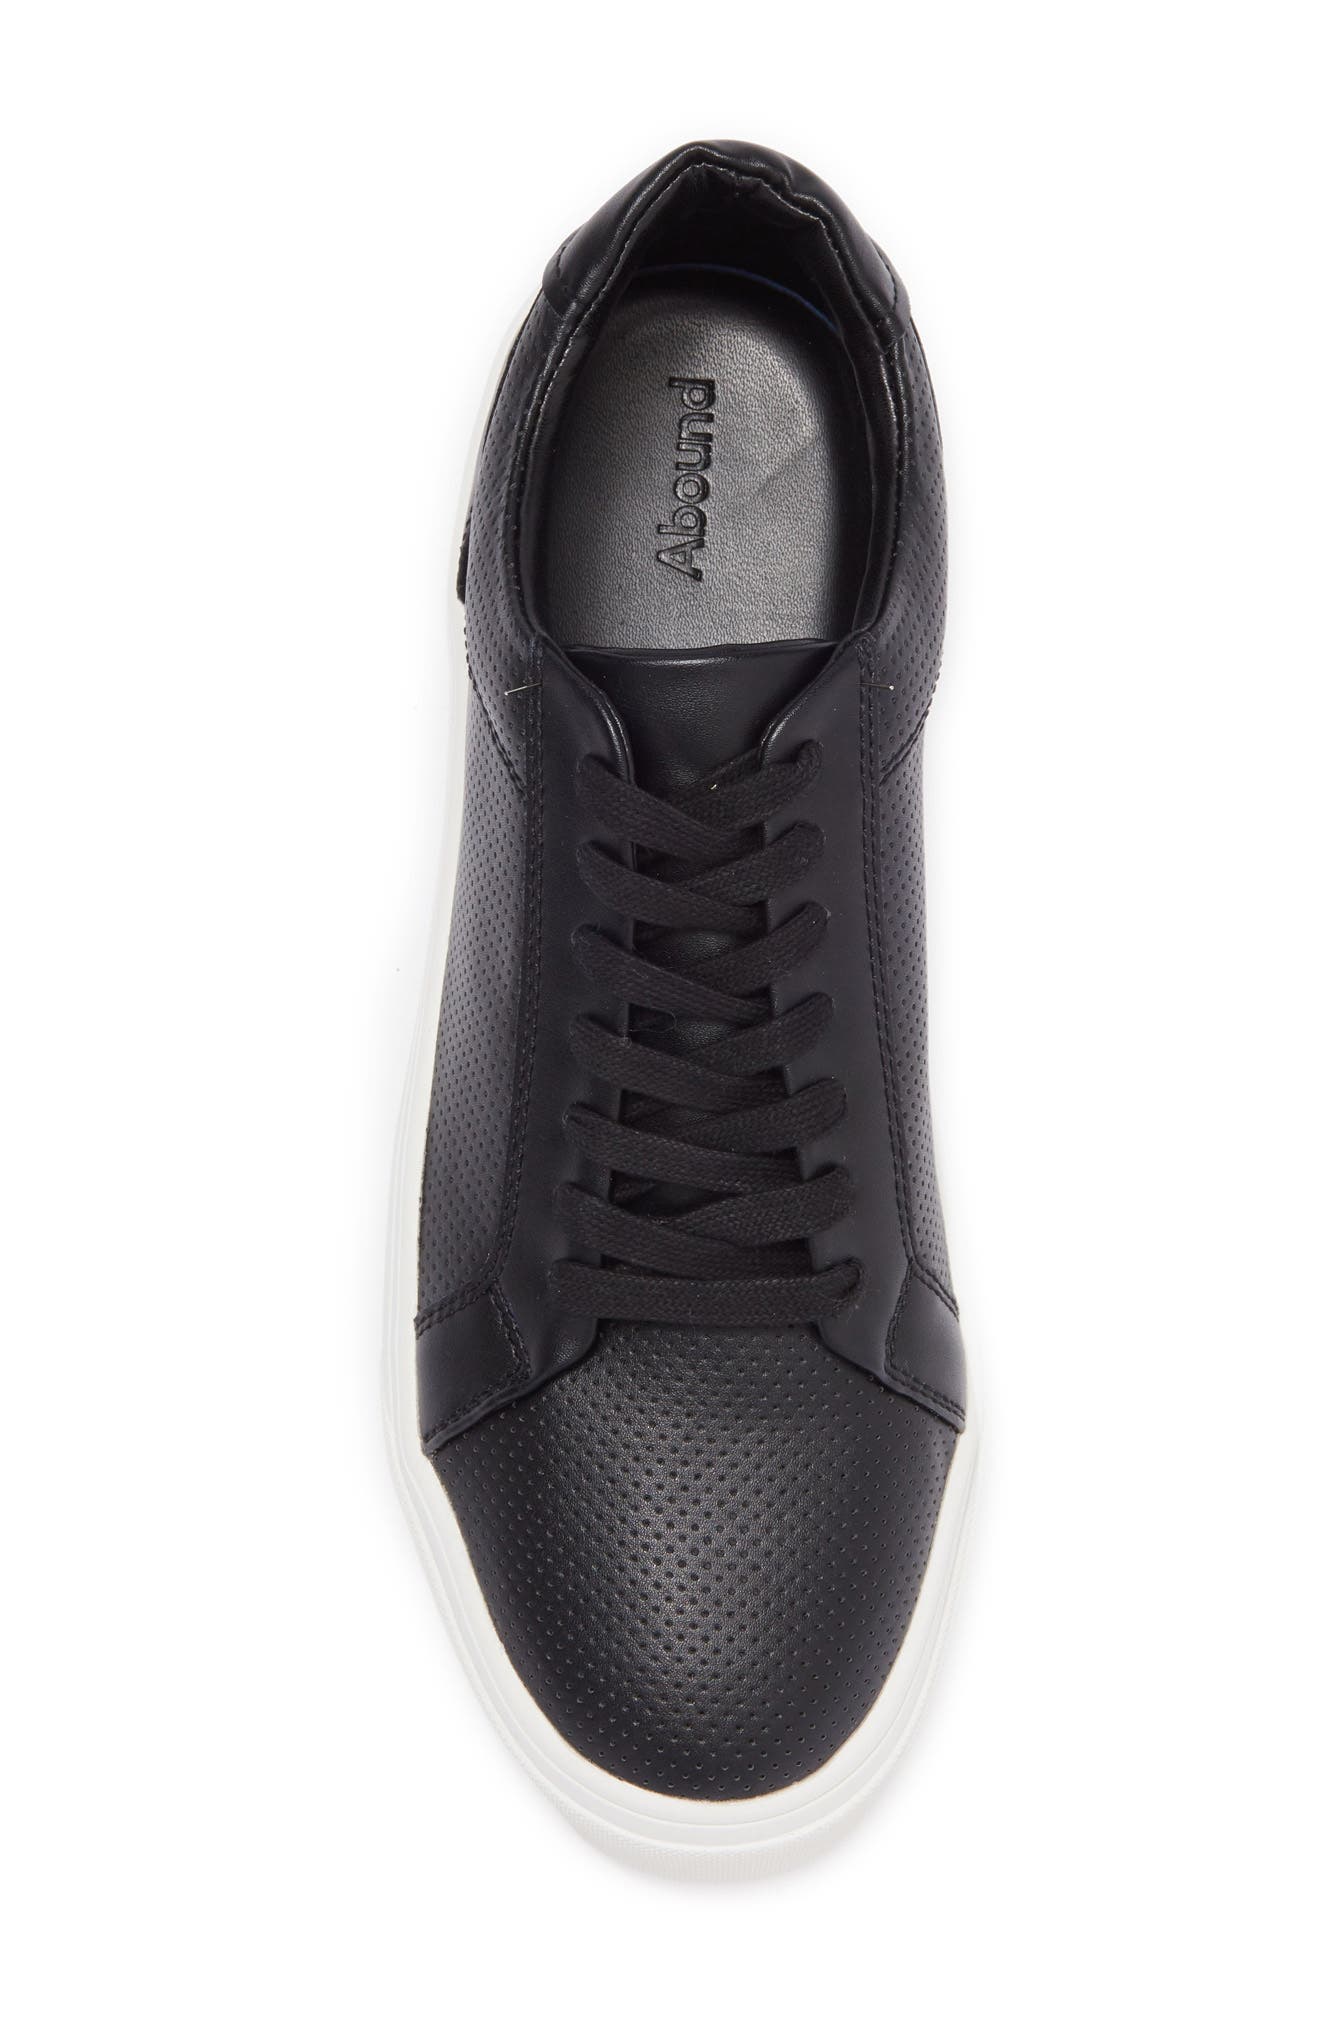 Abound Baxter Perforated Sneaker In Black